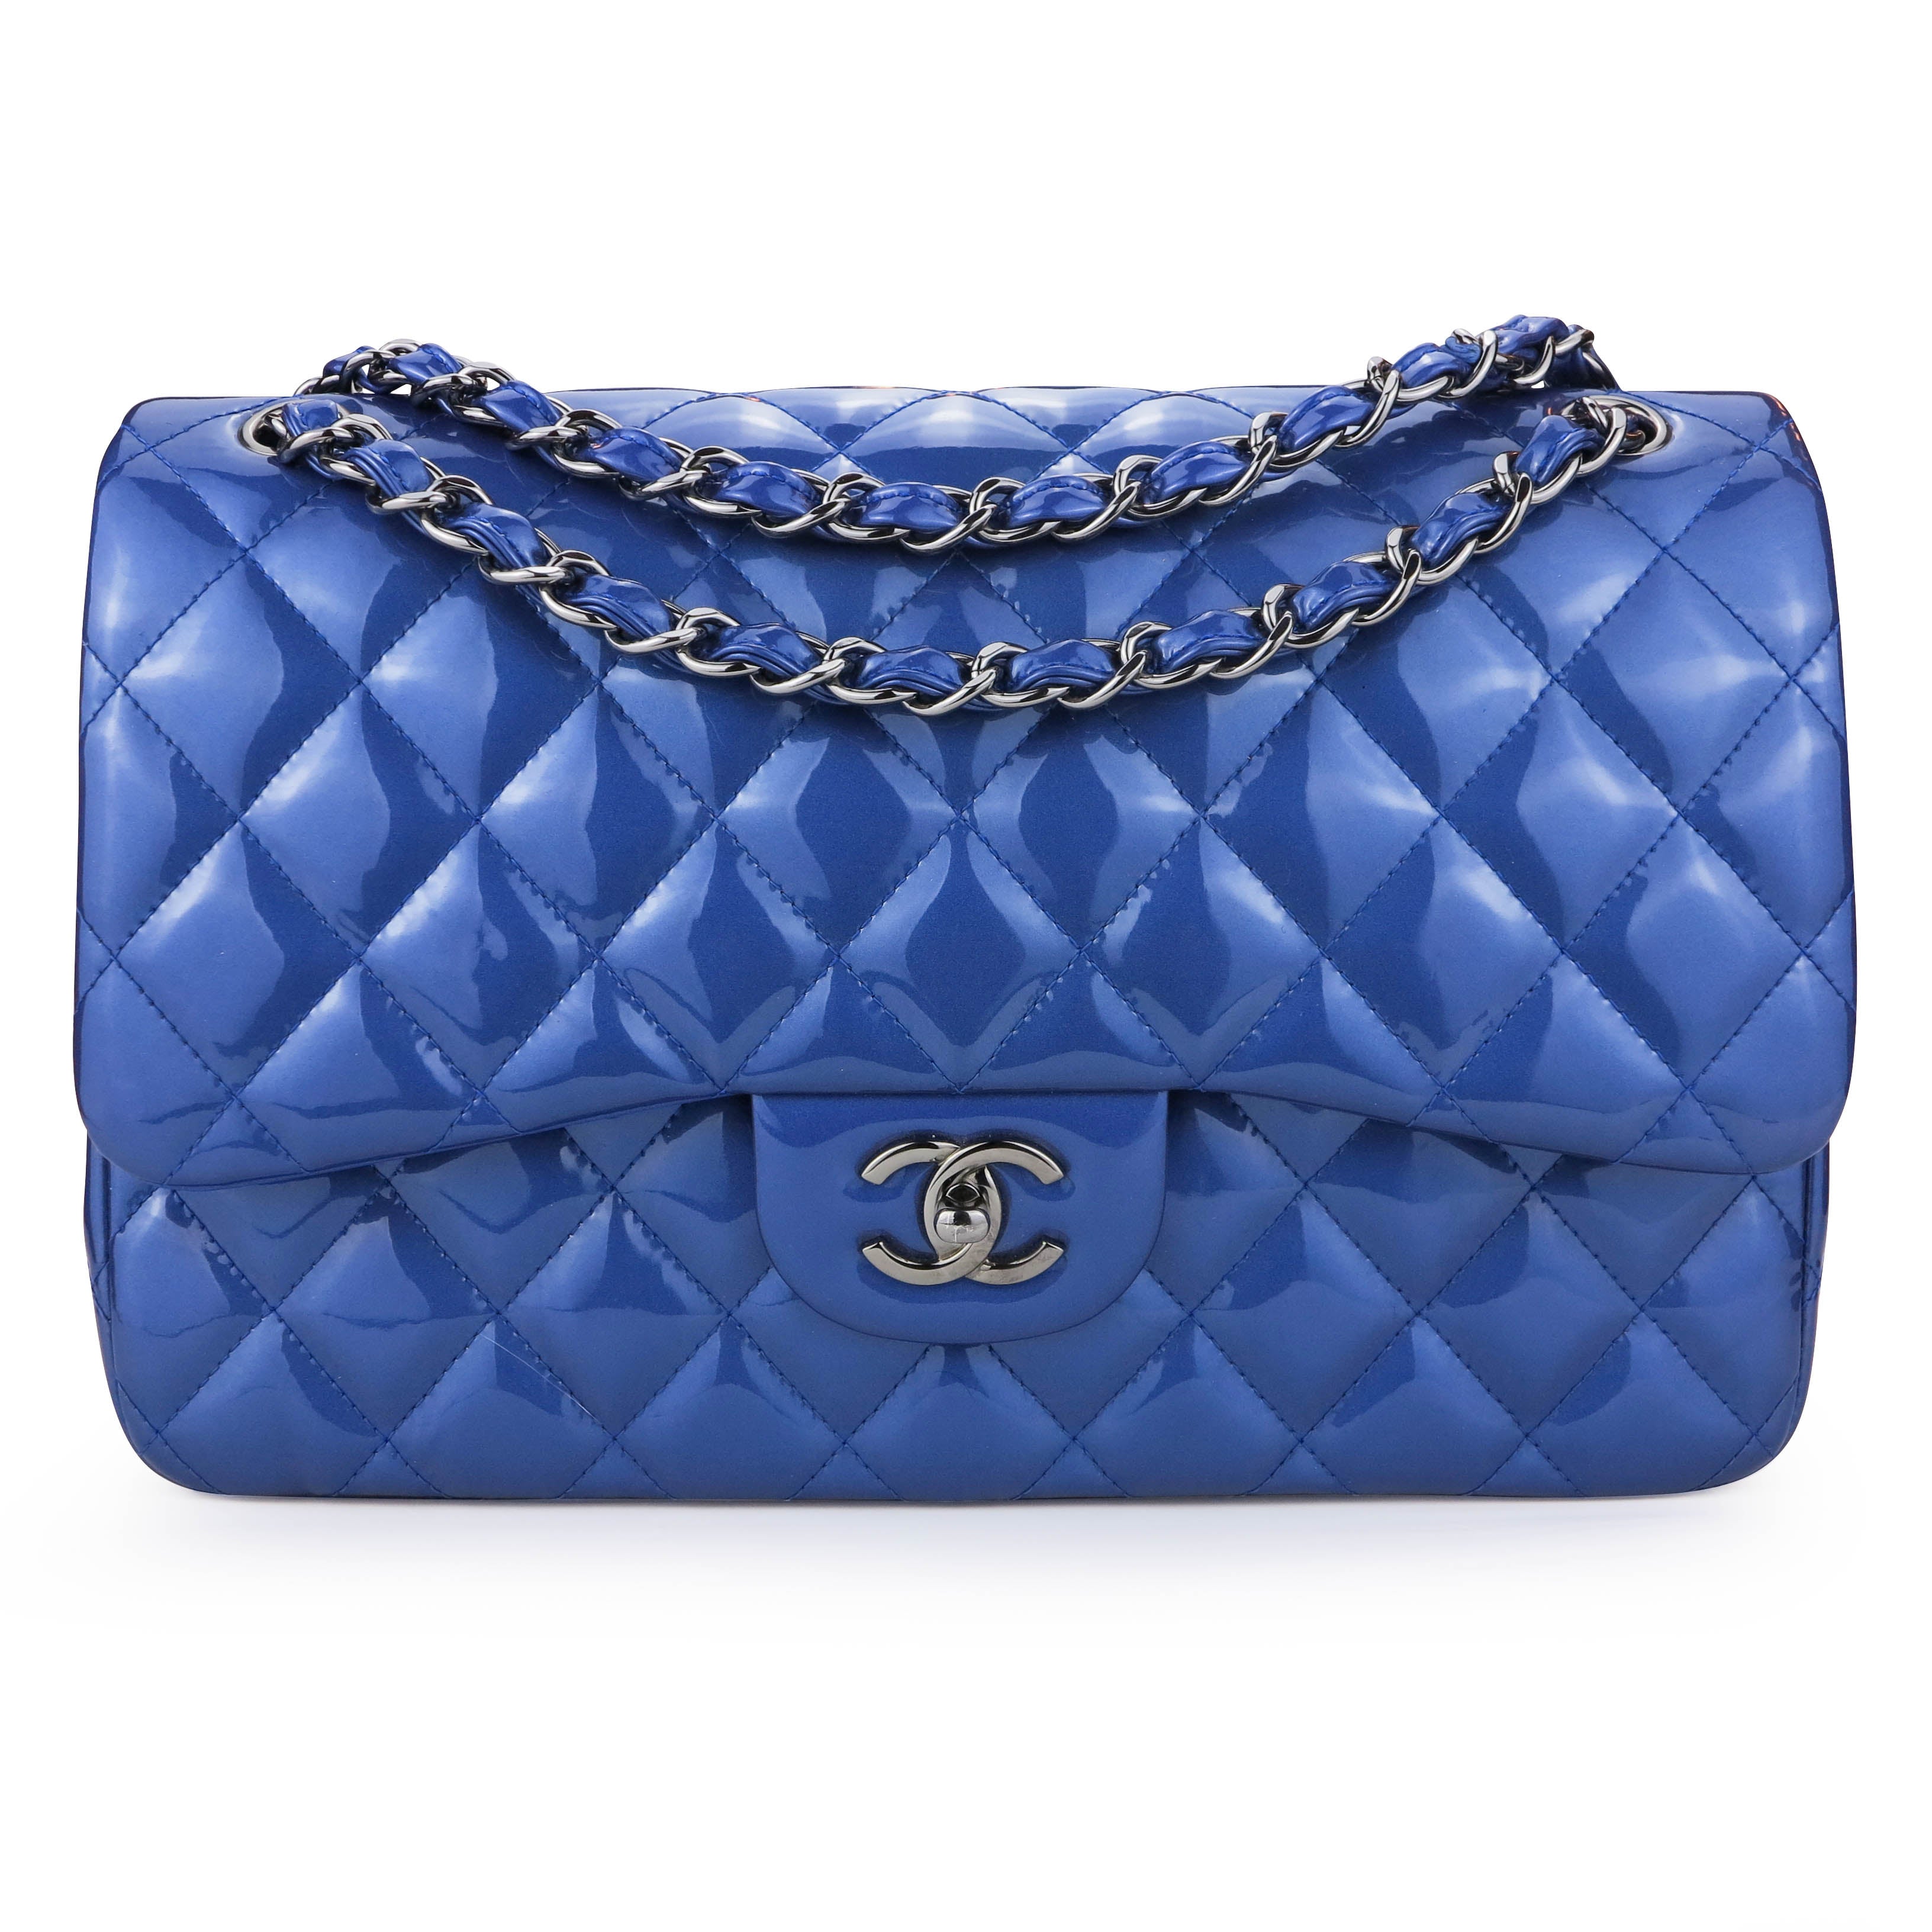 Chanel Jumbo Classic Double Flap Bag in Blue Patent Leather | Dearluxe